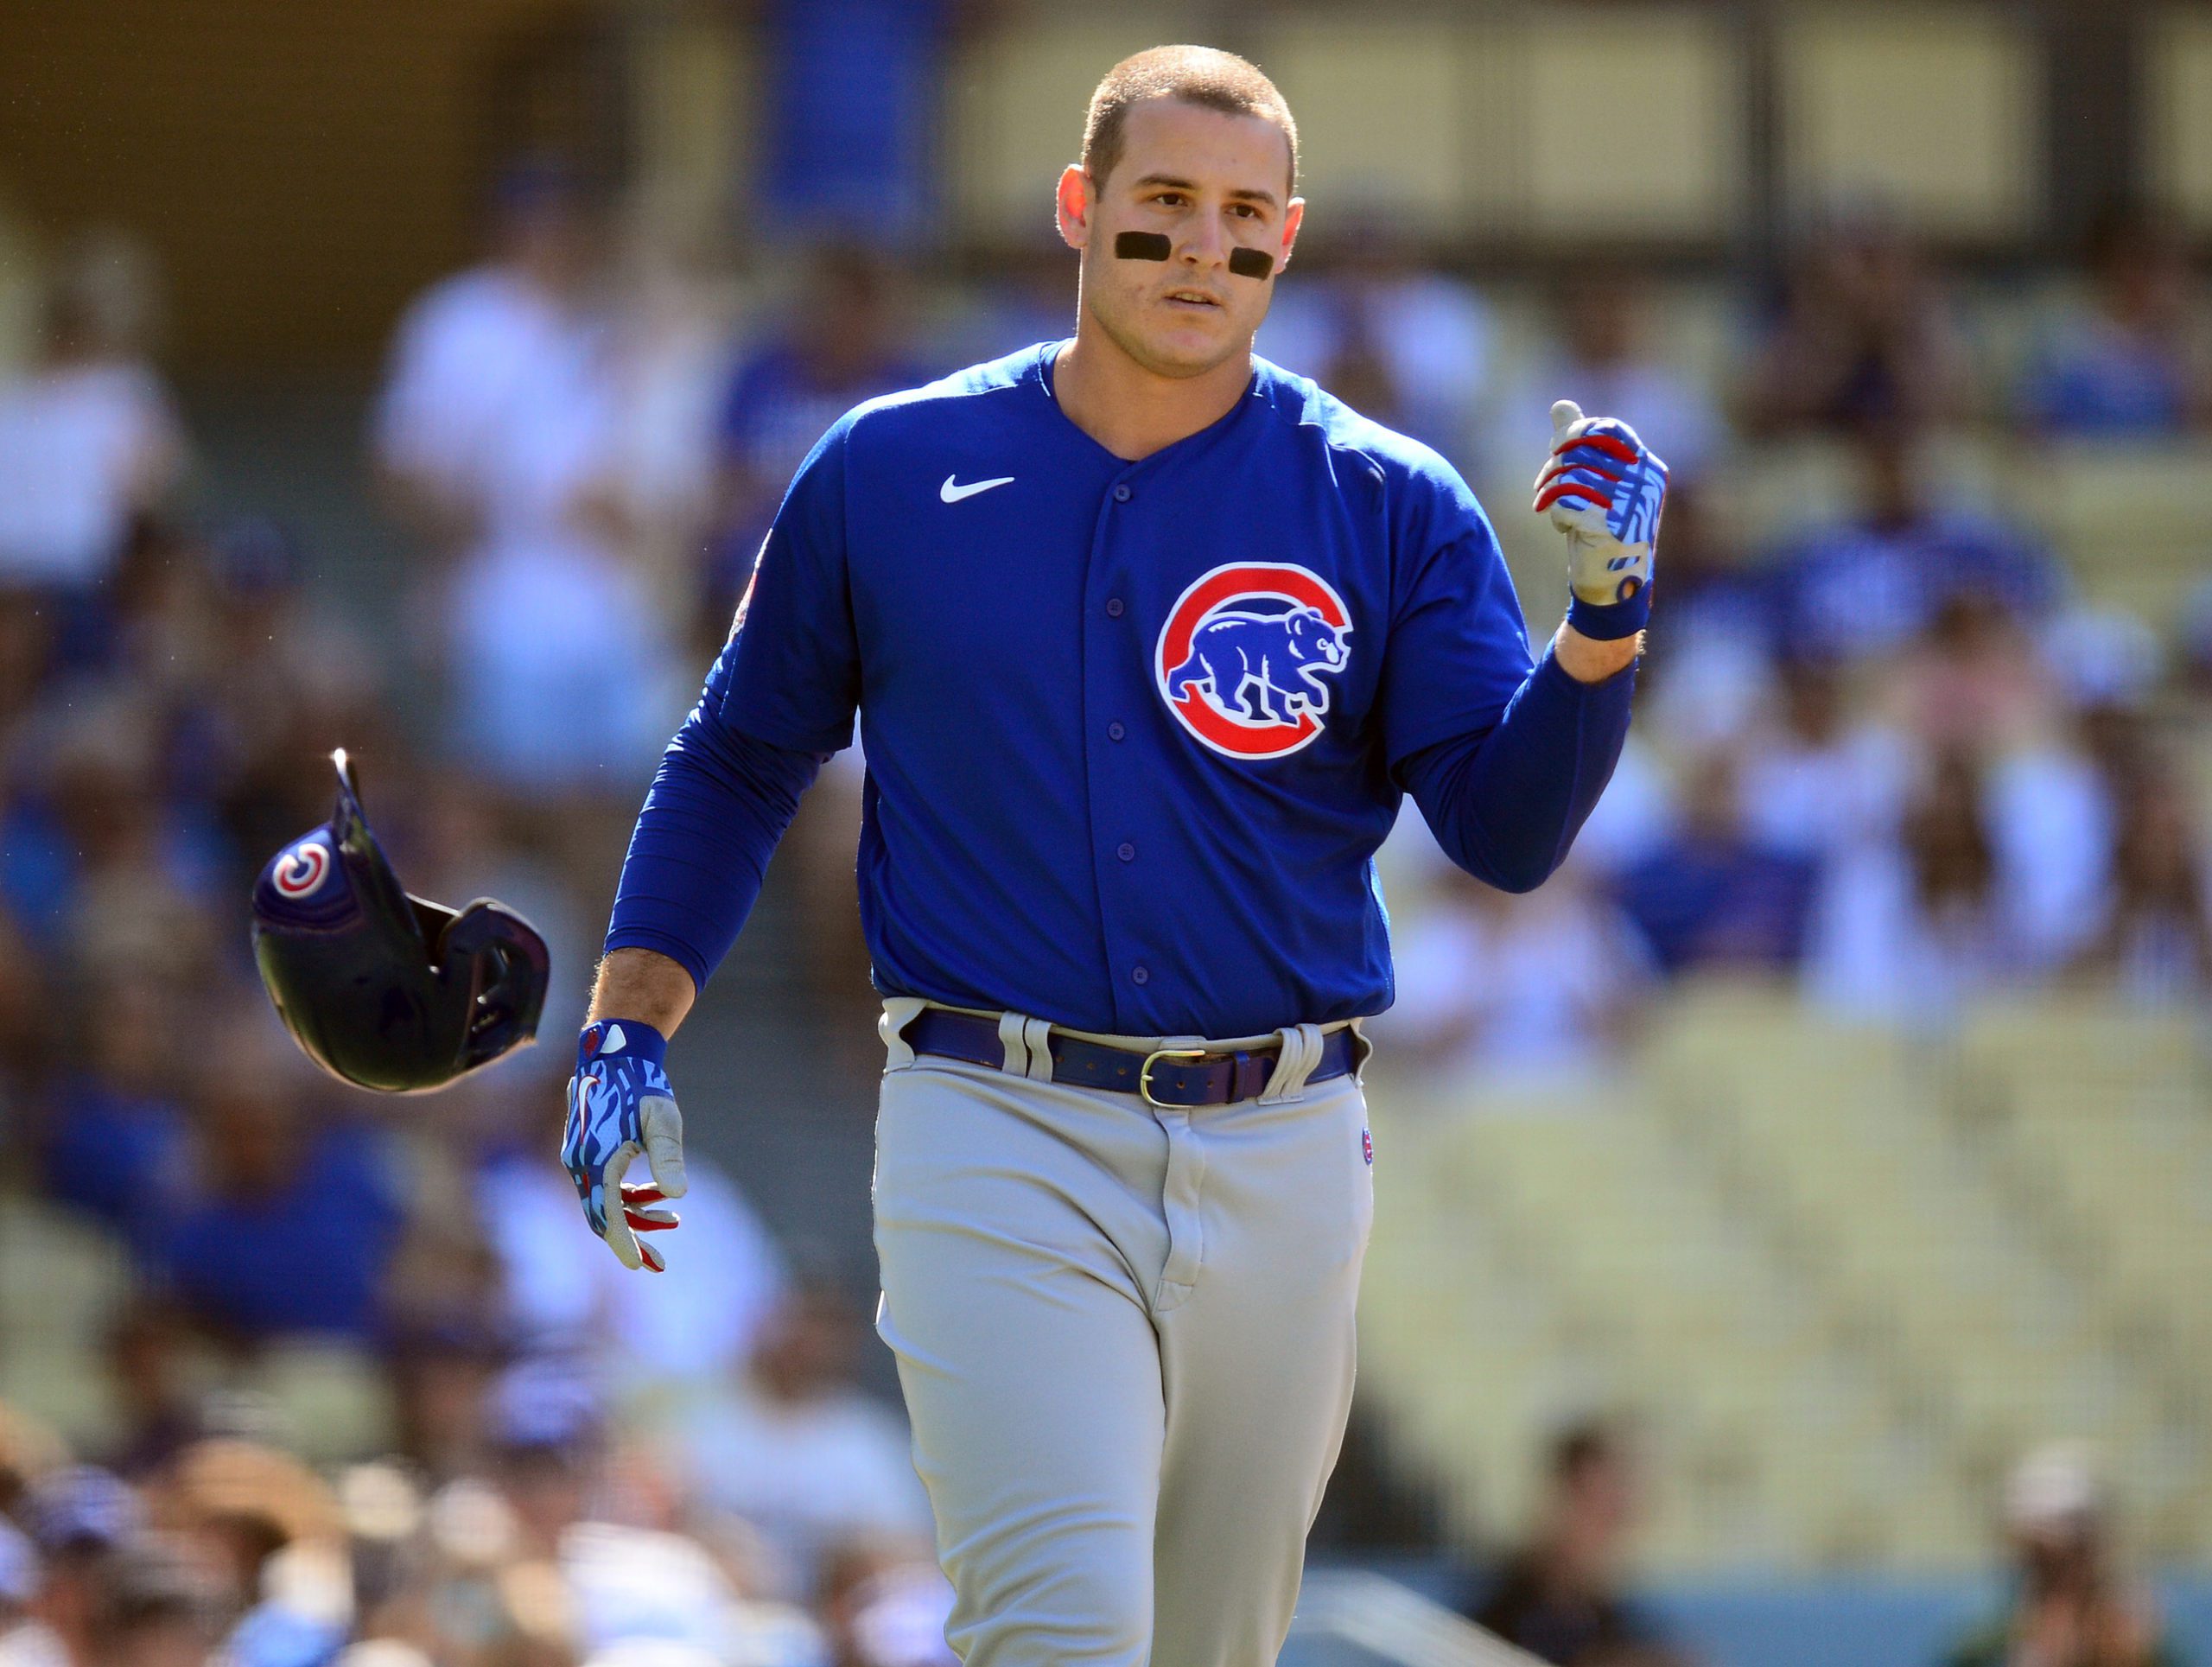 Anthony Rizzo Traded To The Bronx